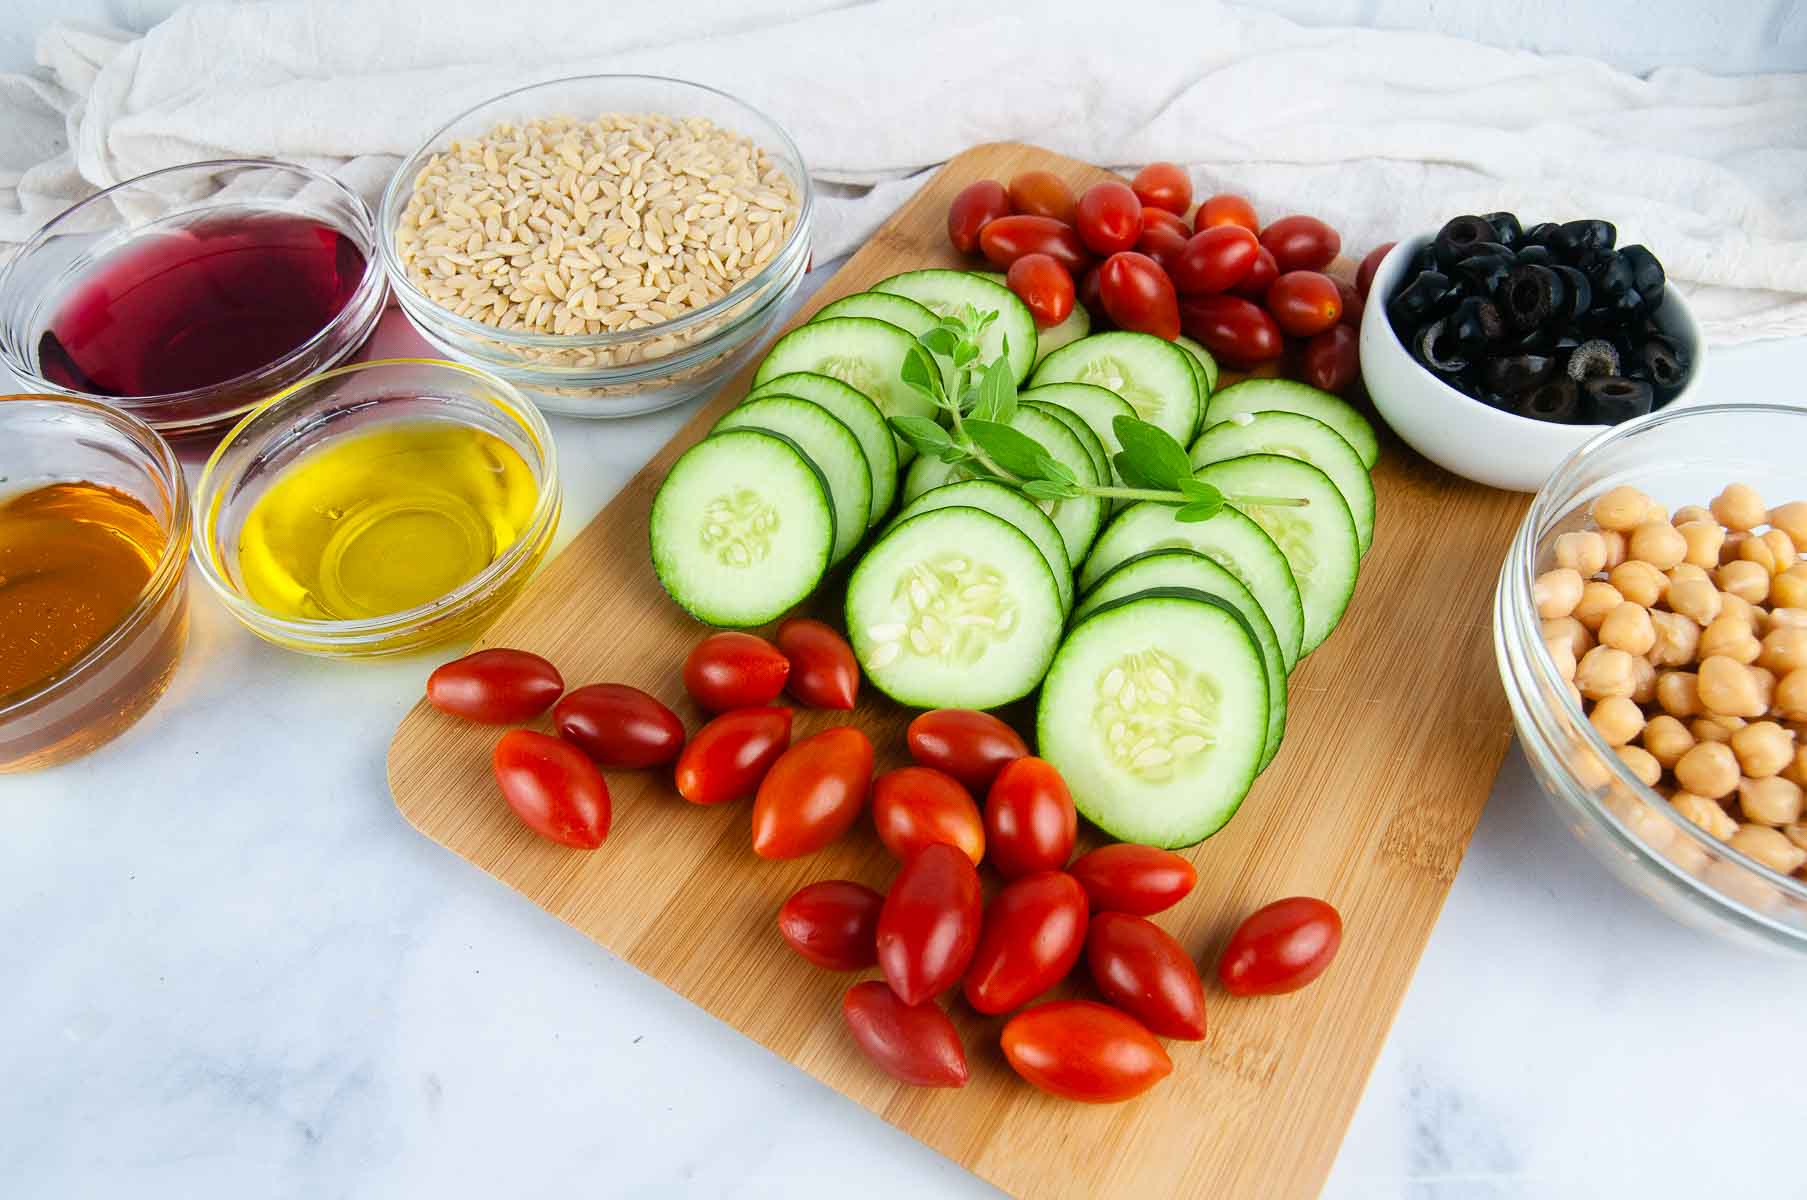 Ingredients for Greek Orzo Salad: orzo, chickpeas, olives, cucumbers, tomatoes, herbs, olive oil, red wine vinegar, honey, and lemon juice